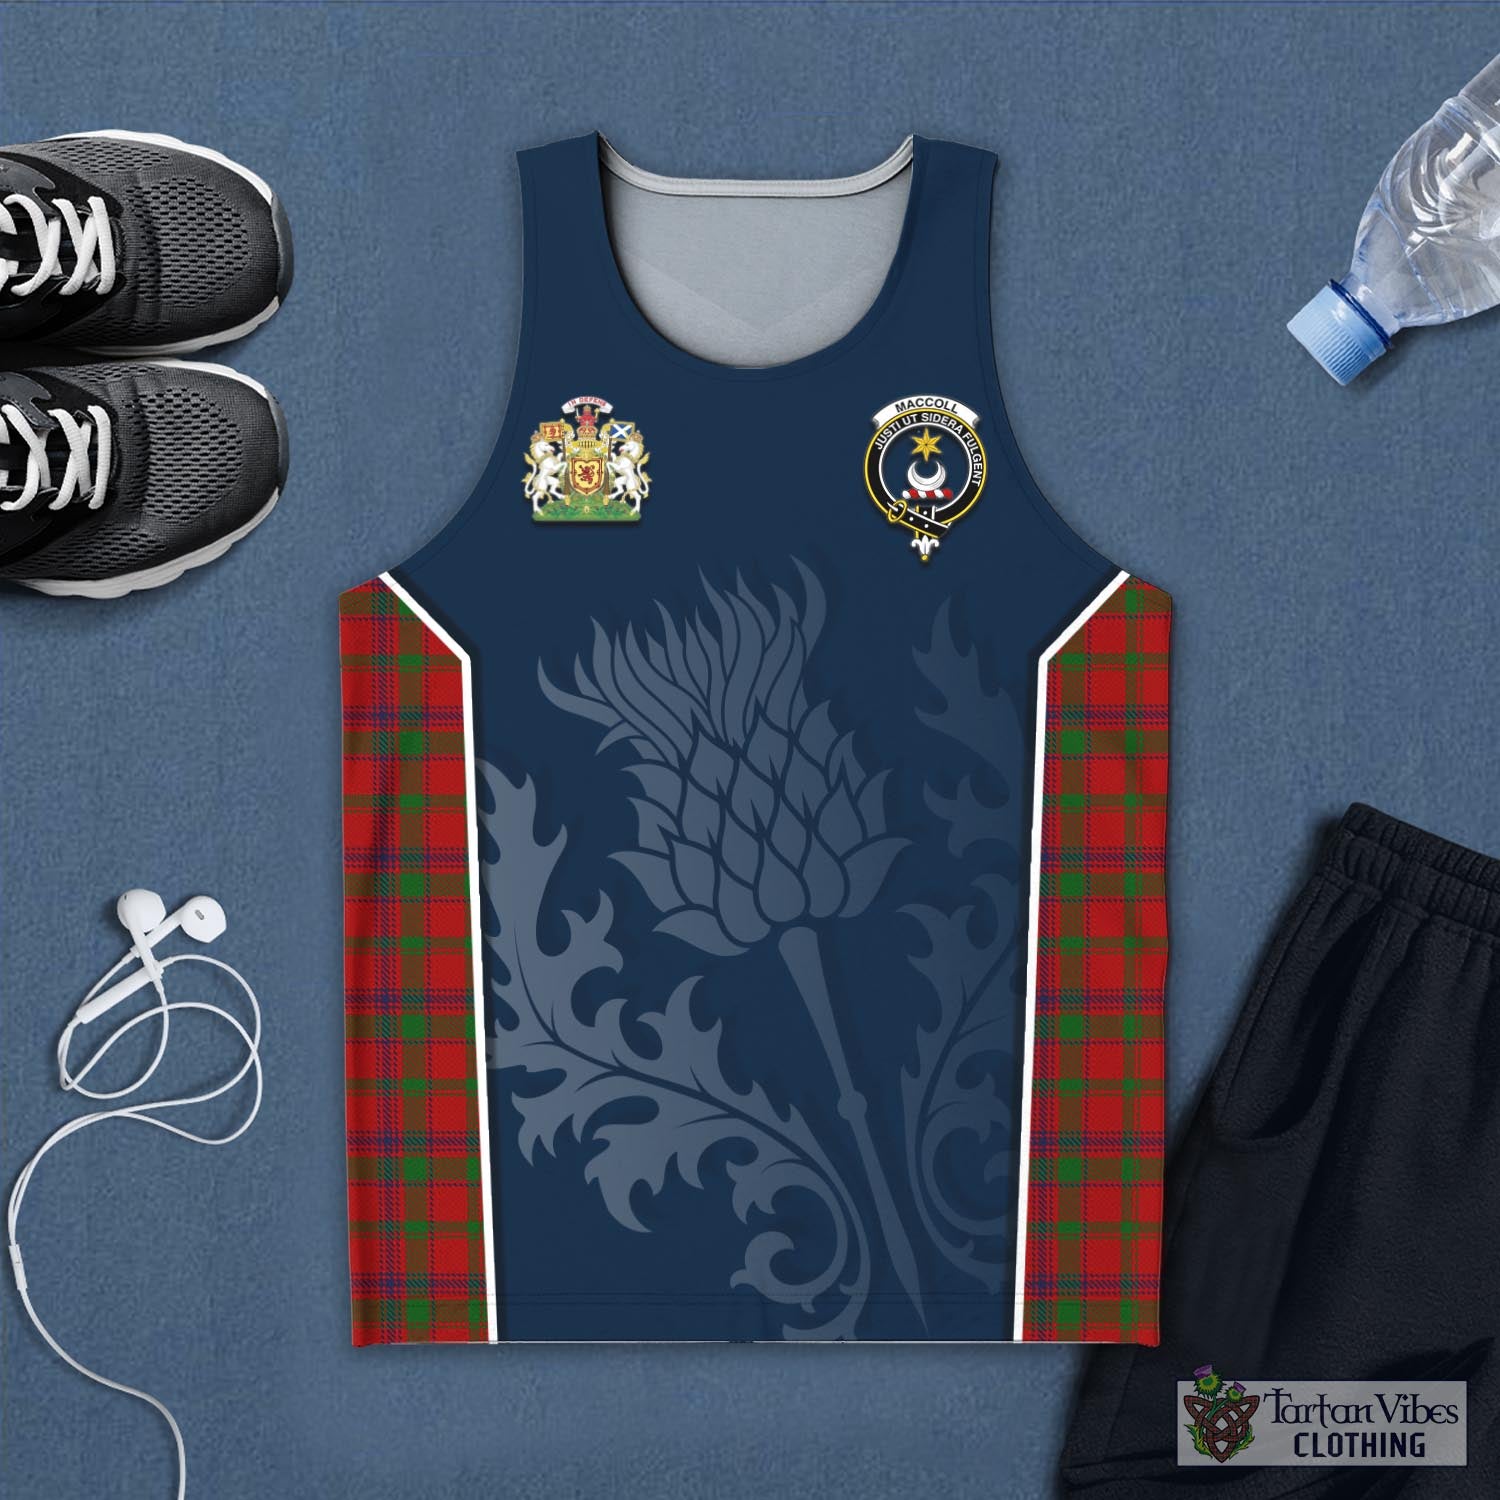 Tartan Vibes Clothing MacColl Tartan Men's Tanks Top with Family Crest and Scottish Thistle Vibes Sport Style